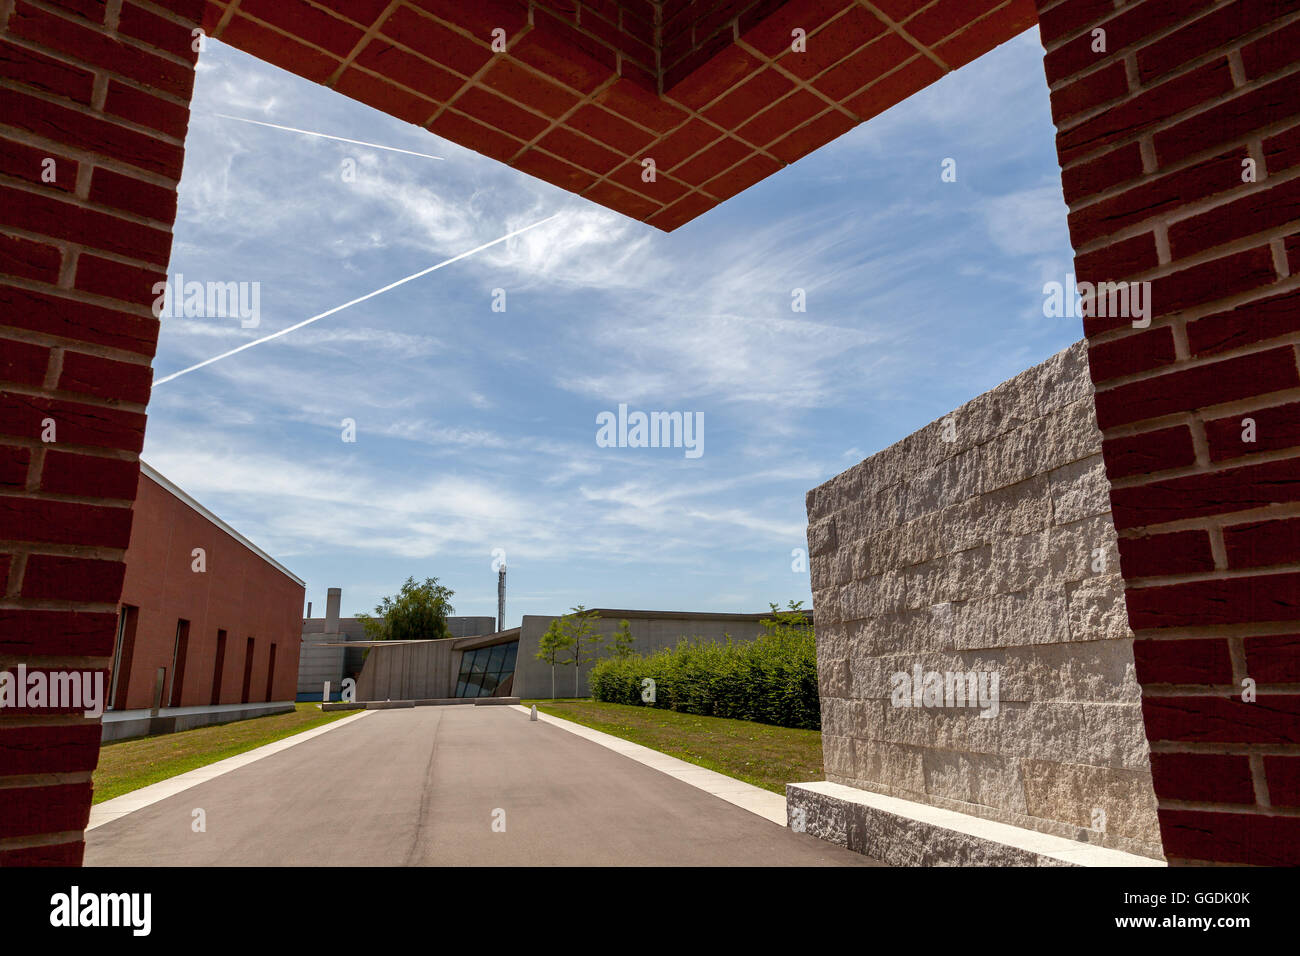 The promenade with “open rooms” by Àlvaro-Siza at the Vitra Campus, Weil am Rhein, Germany. Stock Photo